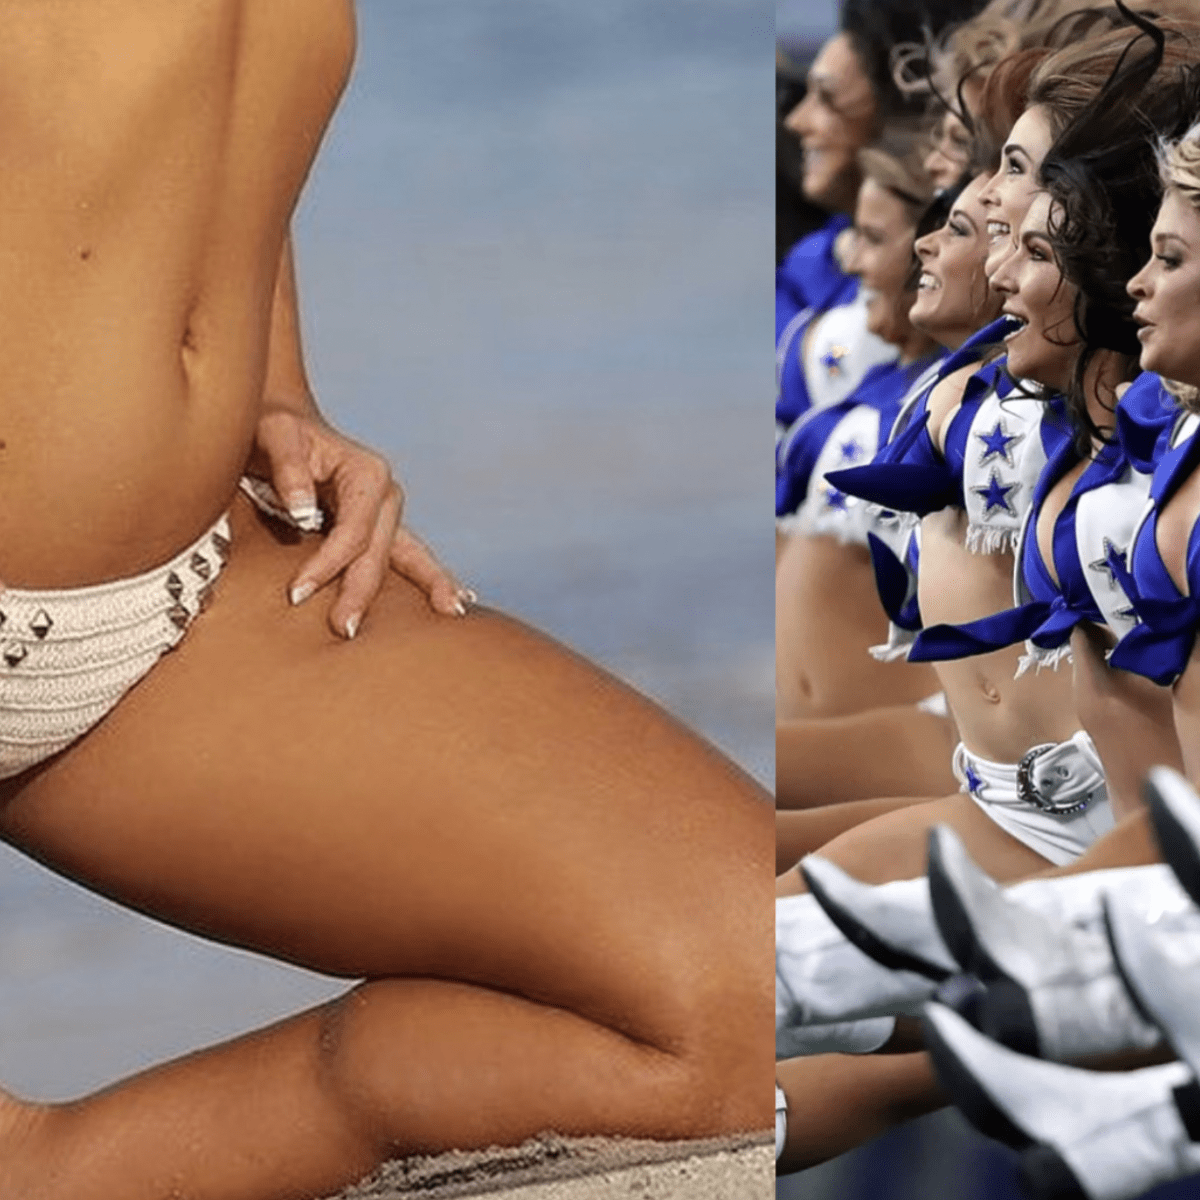 andre lane recommends Cheerleader Panty Shots